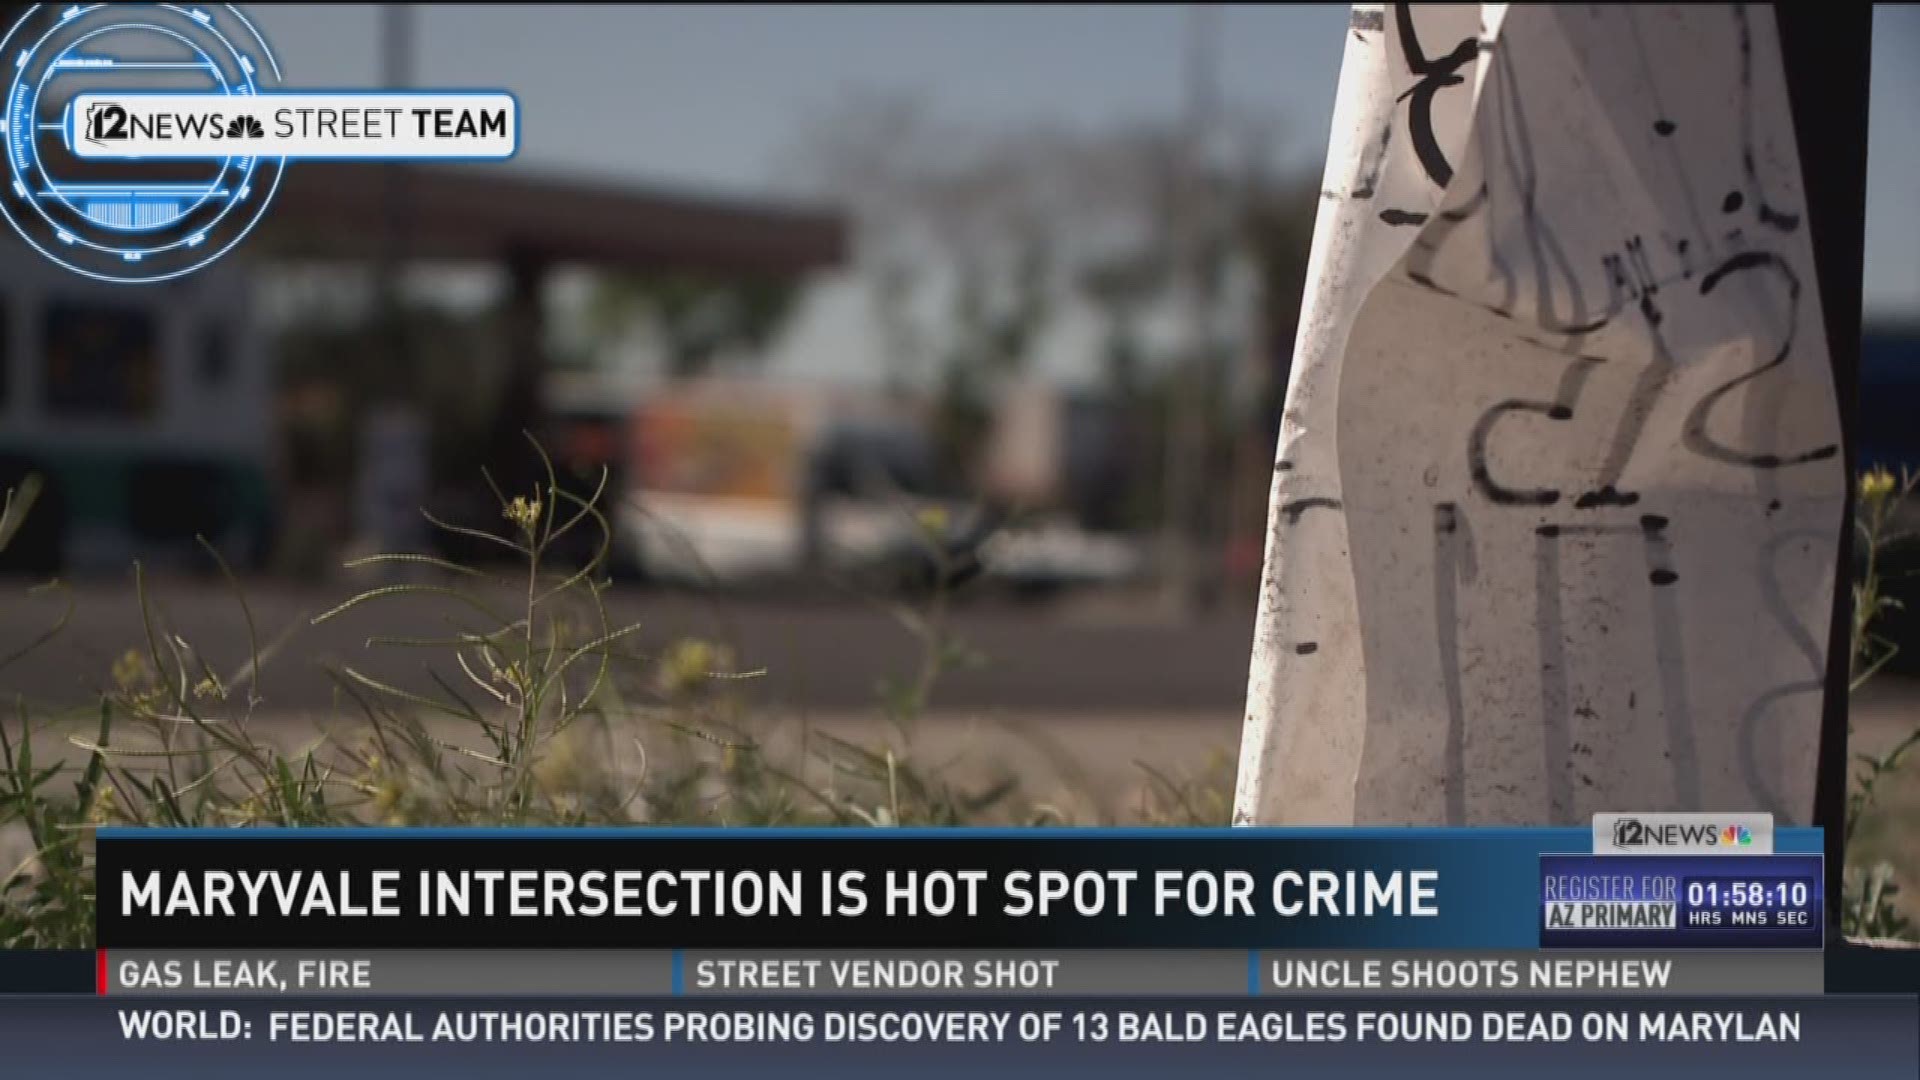 Maryvale intersection is hot for crime.